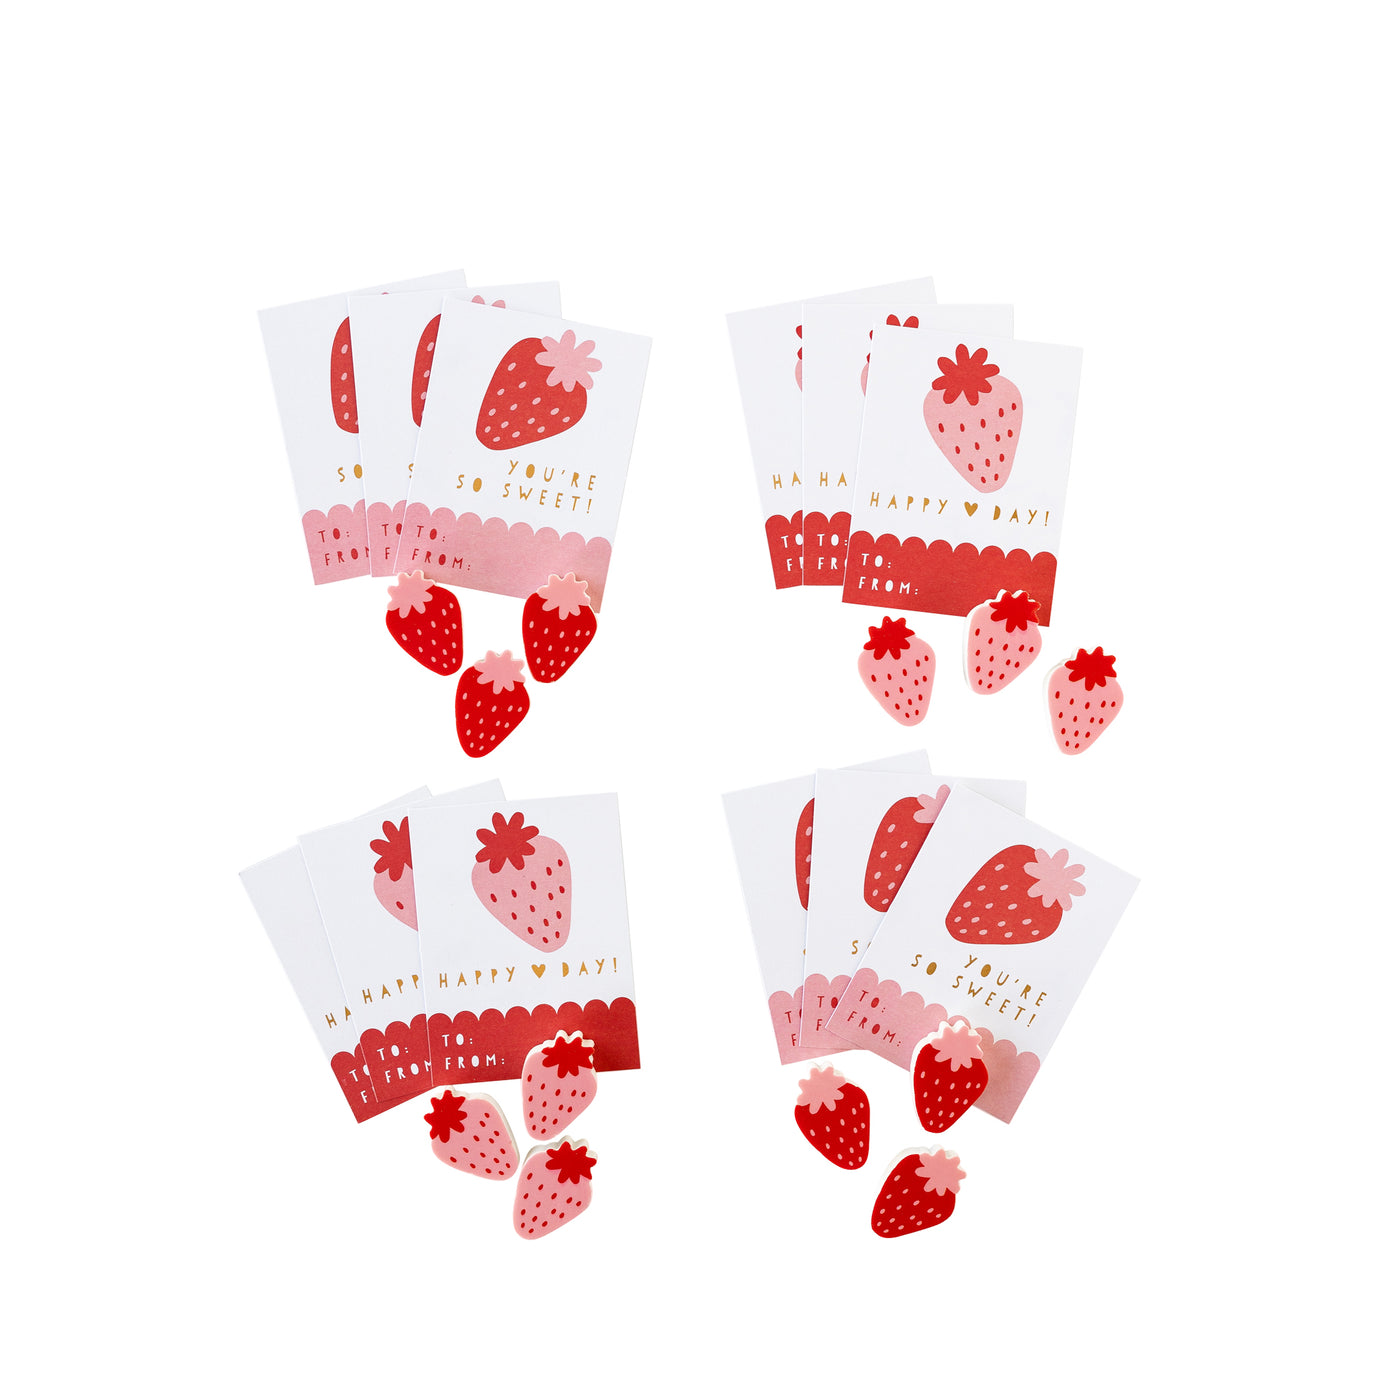 Strawberries and Hearts Valentine's Cards